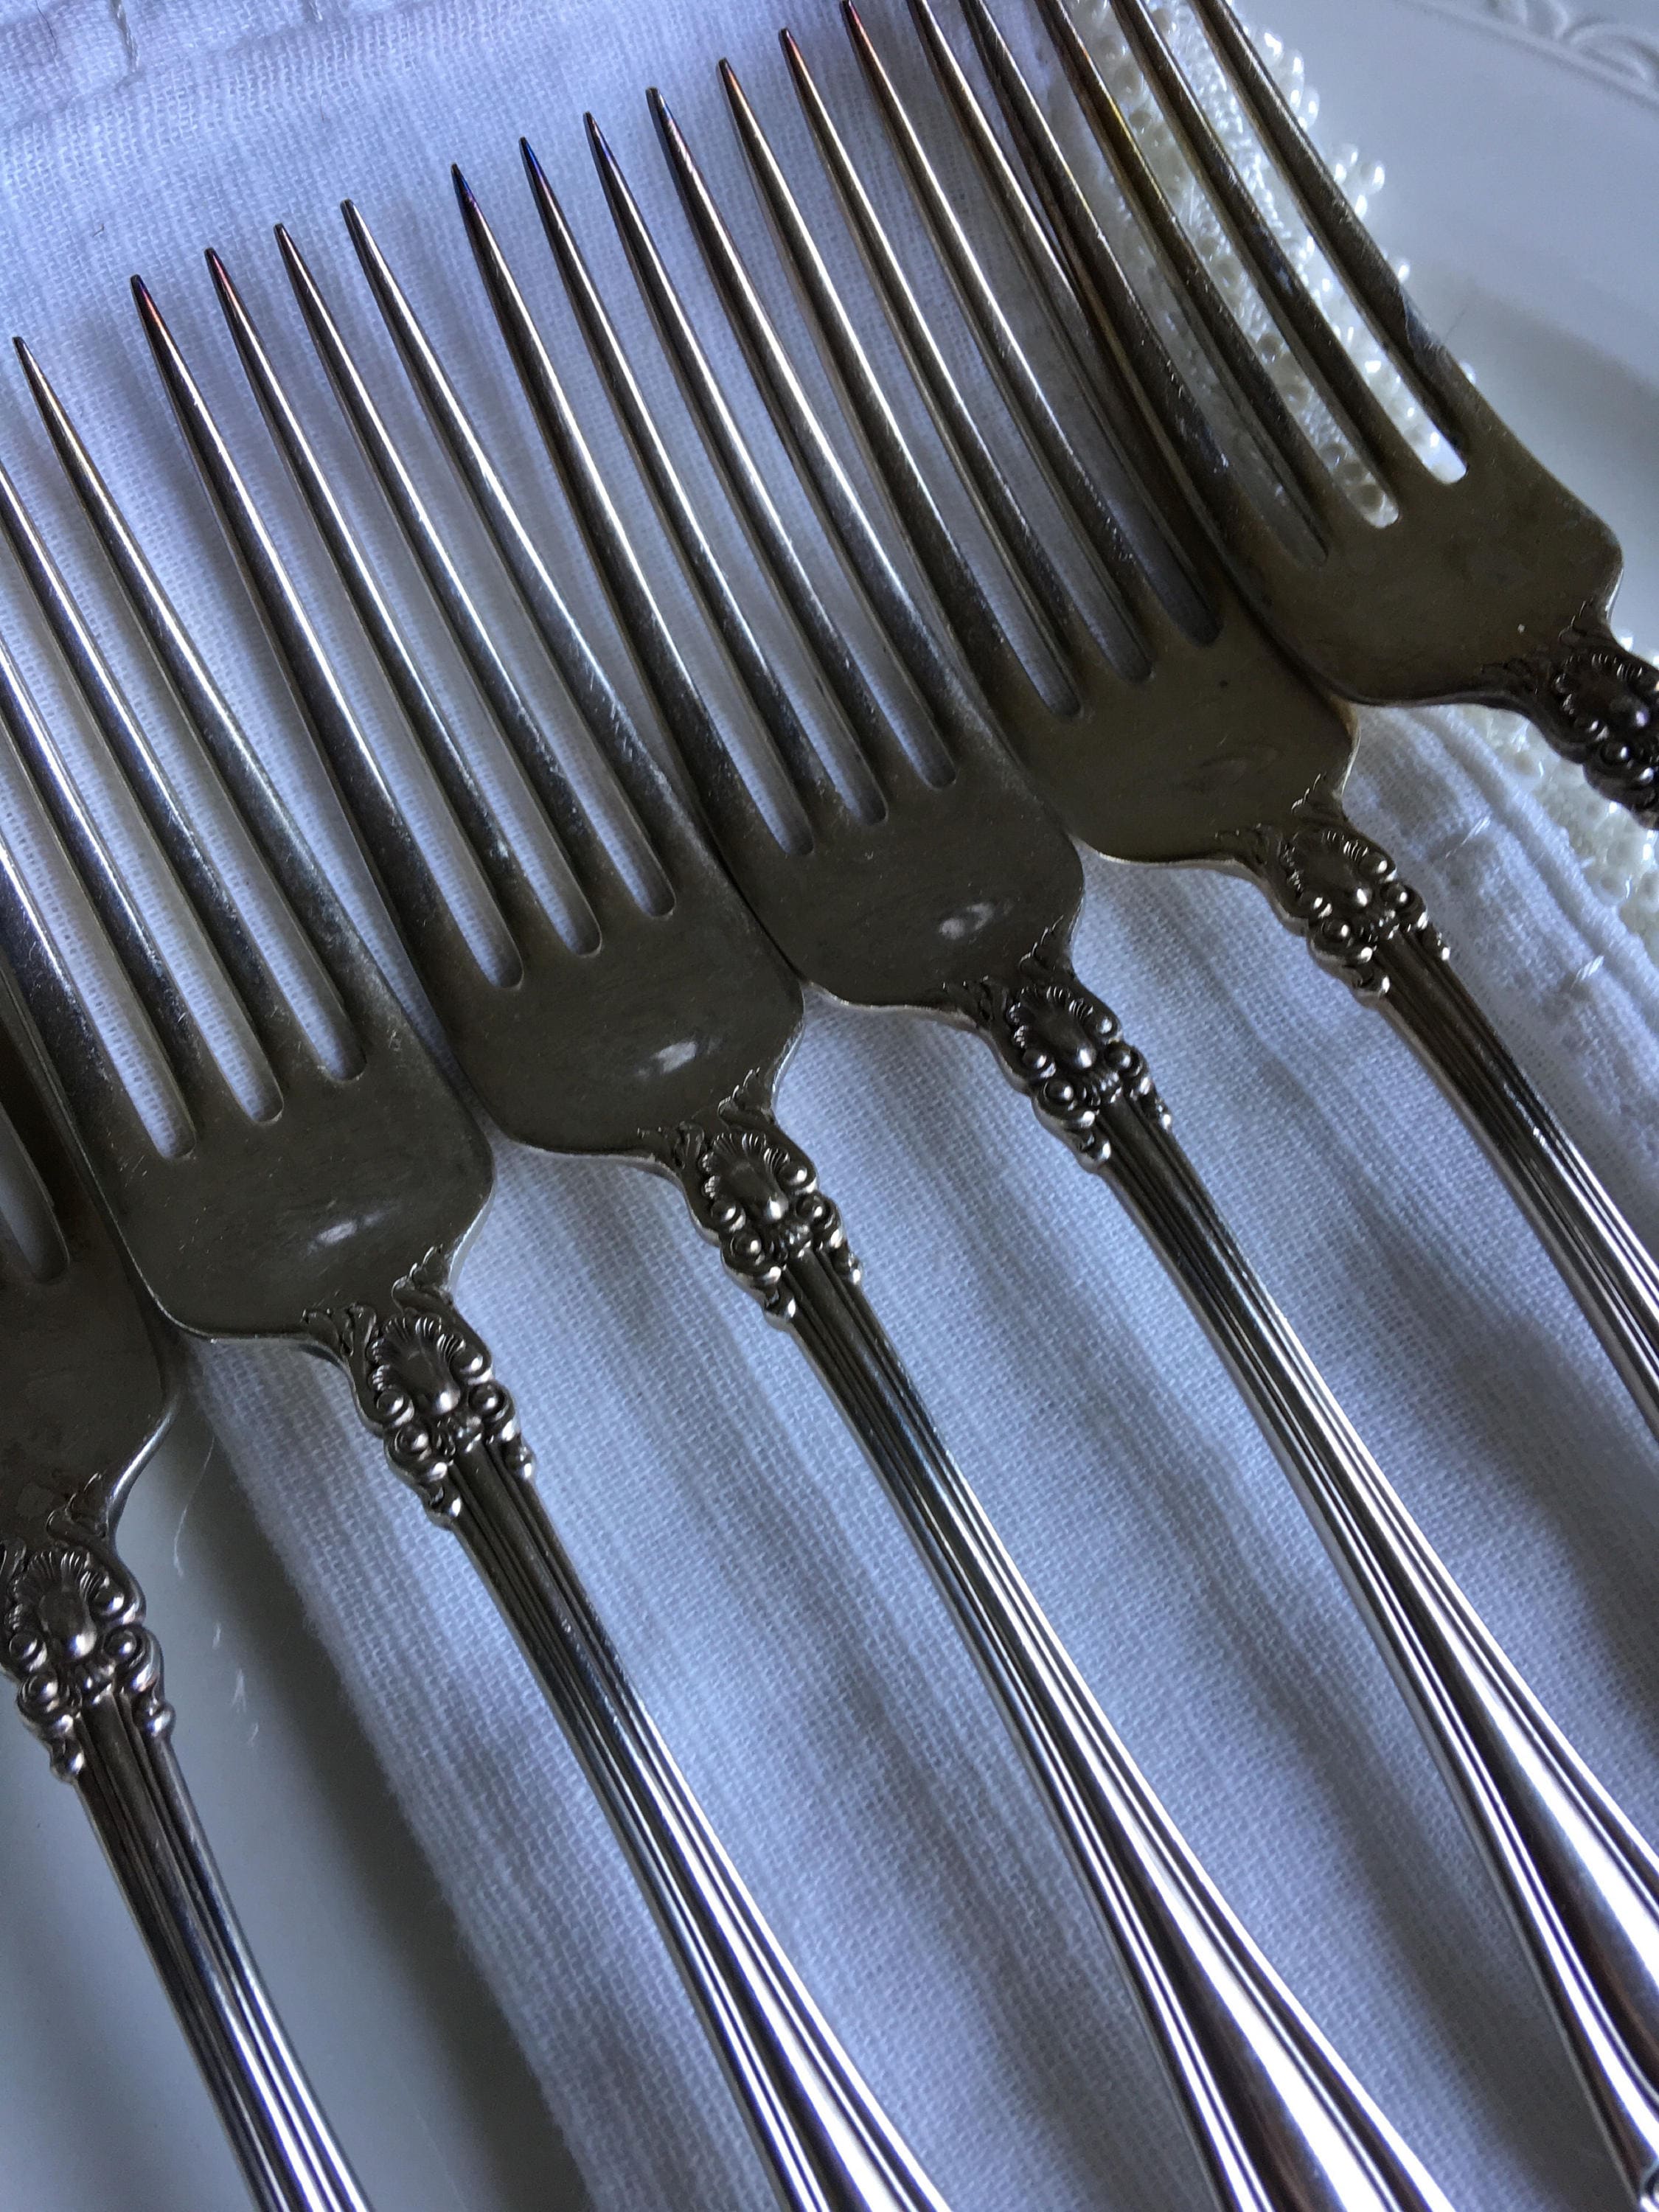 Details about   Wm Rogers & Son IS Silverplate Flatware Floral Design Silverware 3 Dinner Forks 